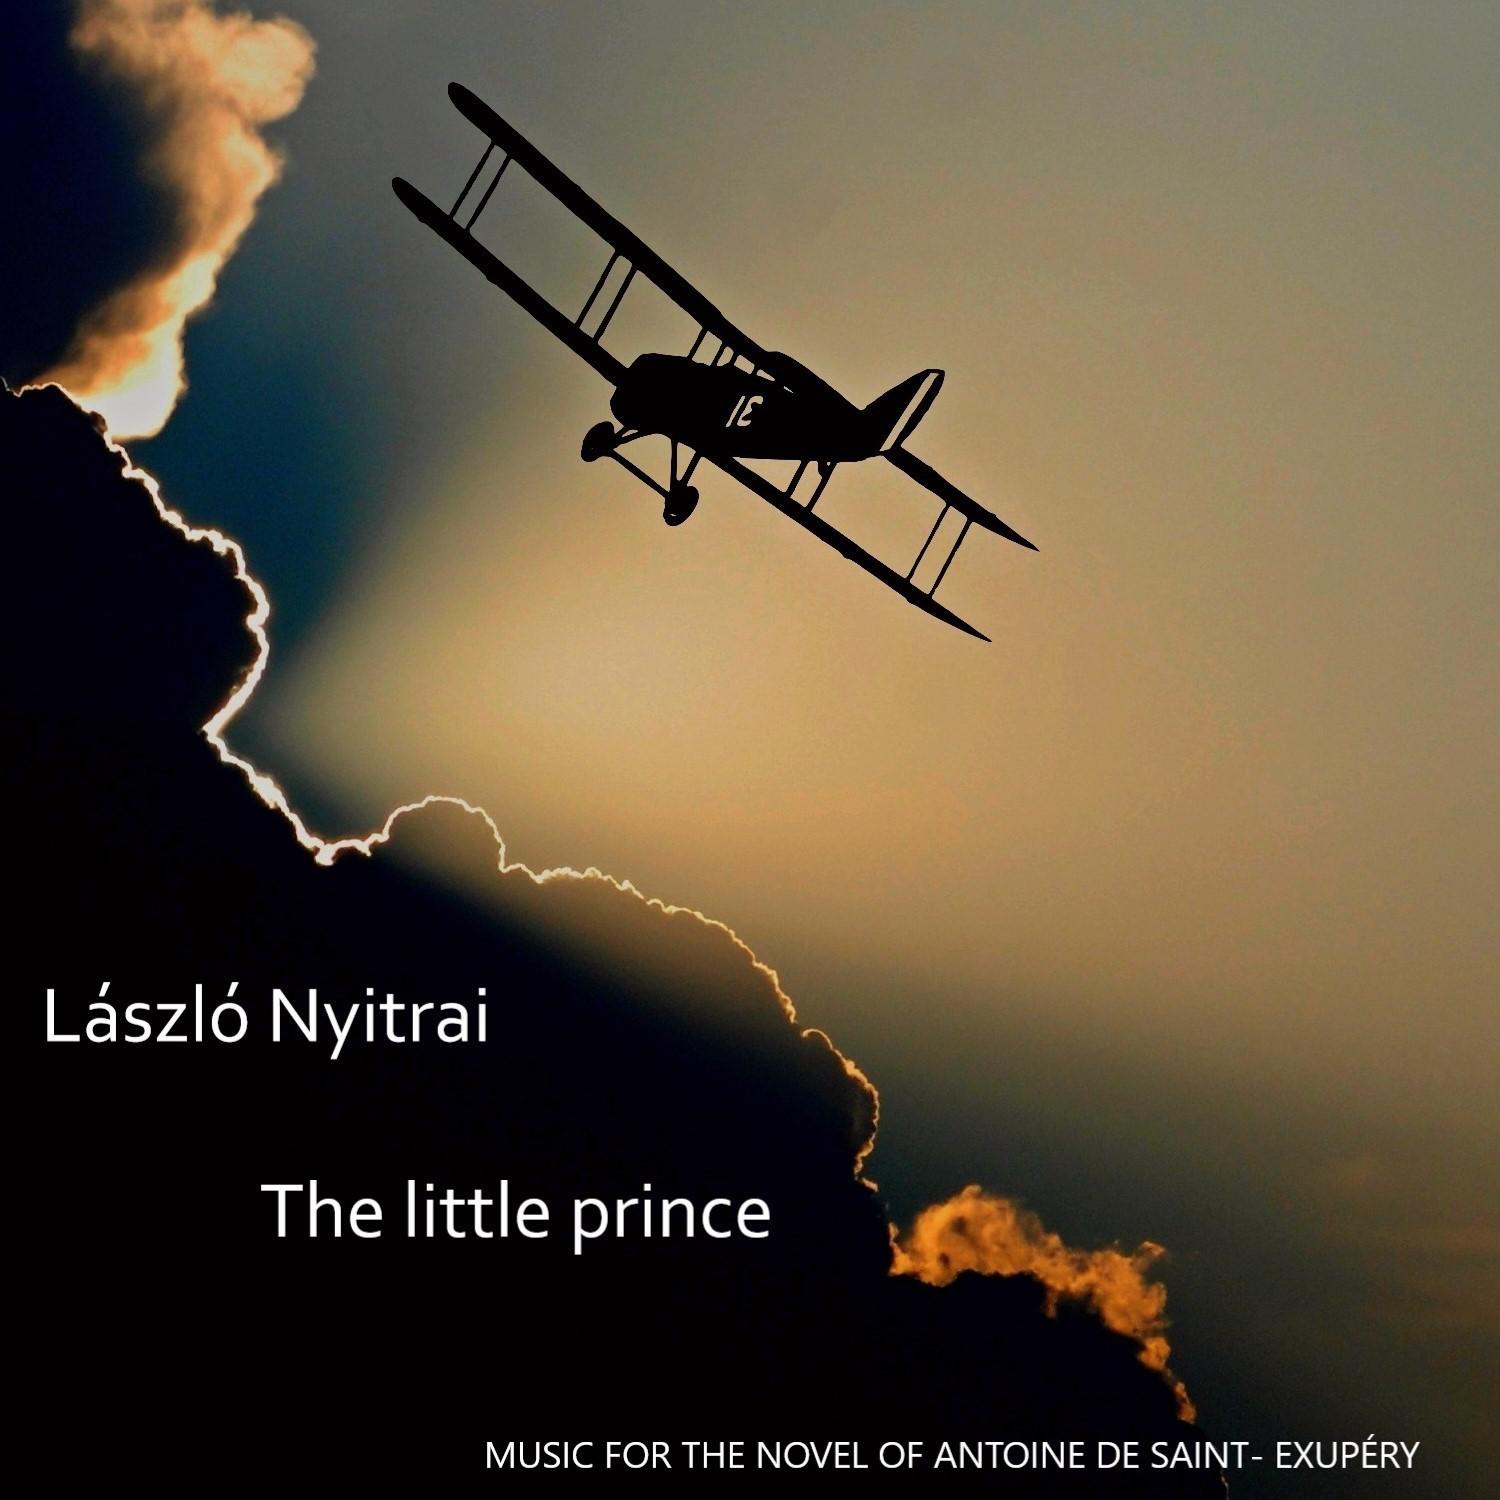 The apperance of the little prince effect